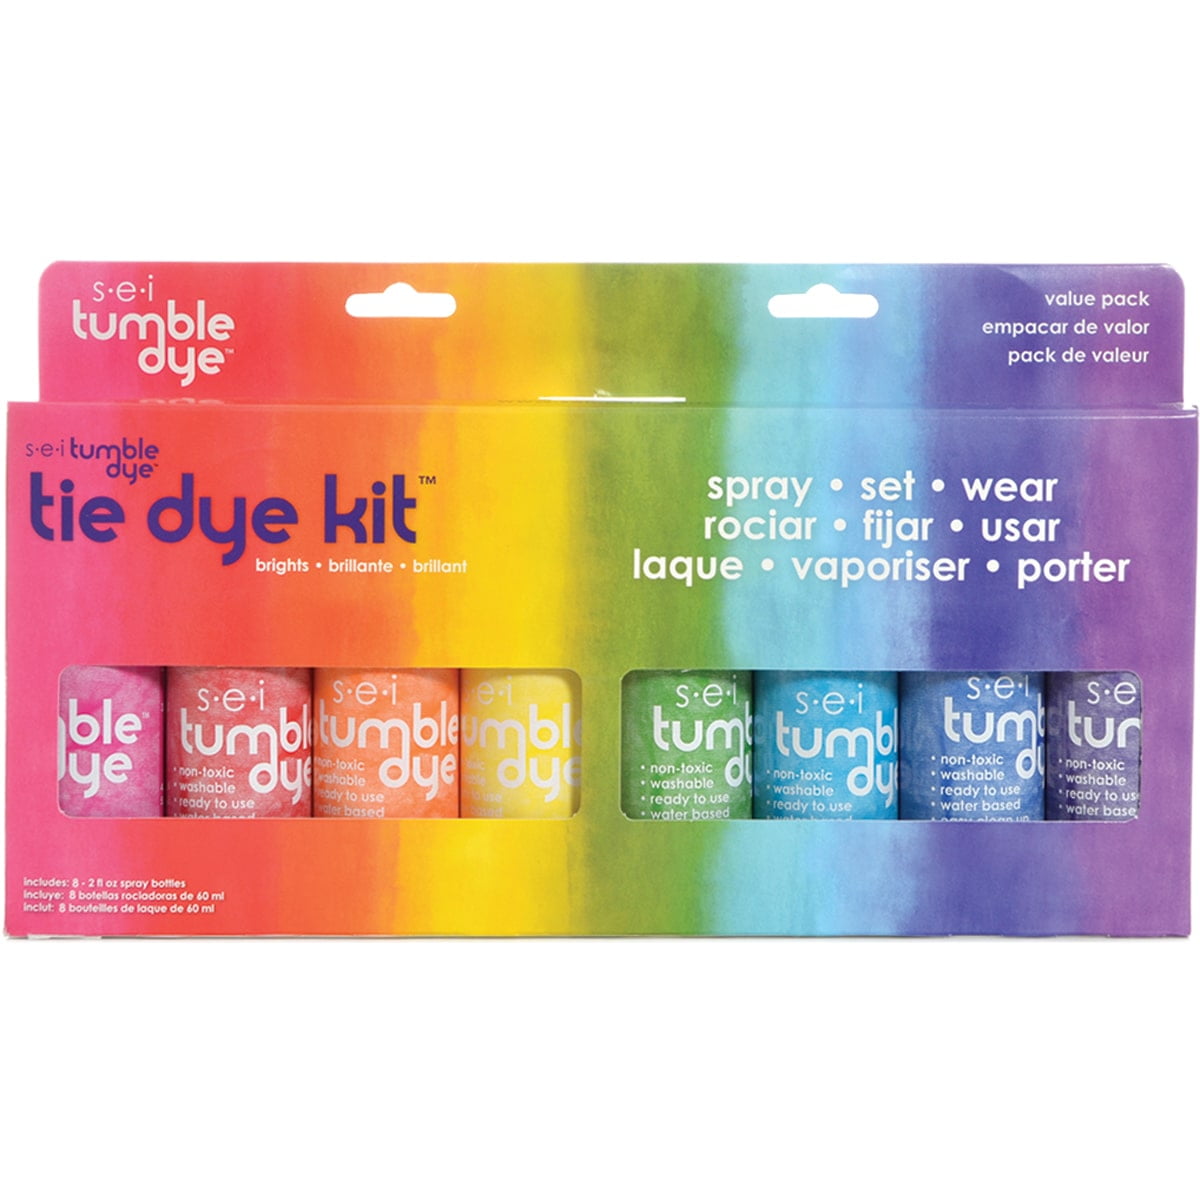 Liquid Candle Dye Kit- All 27 colors